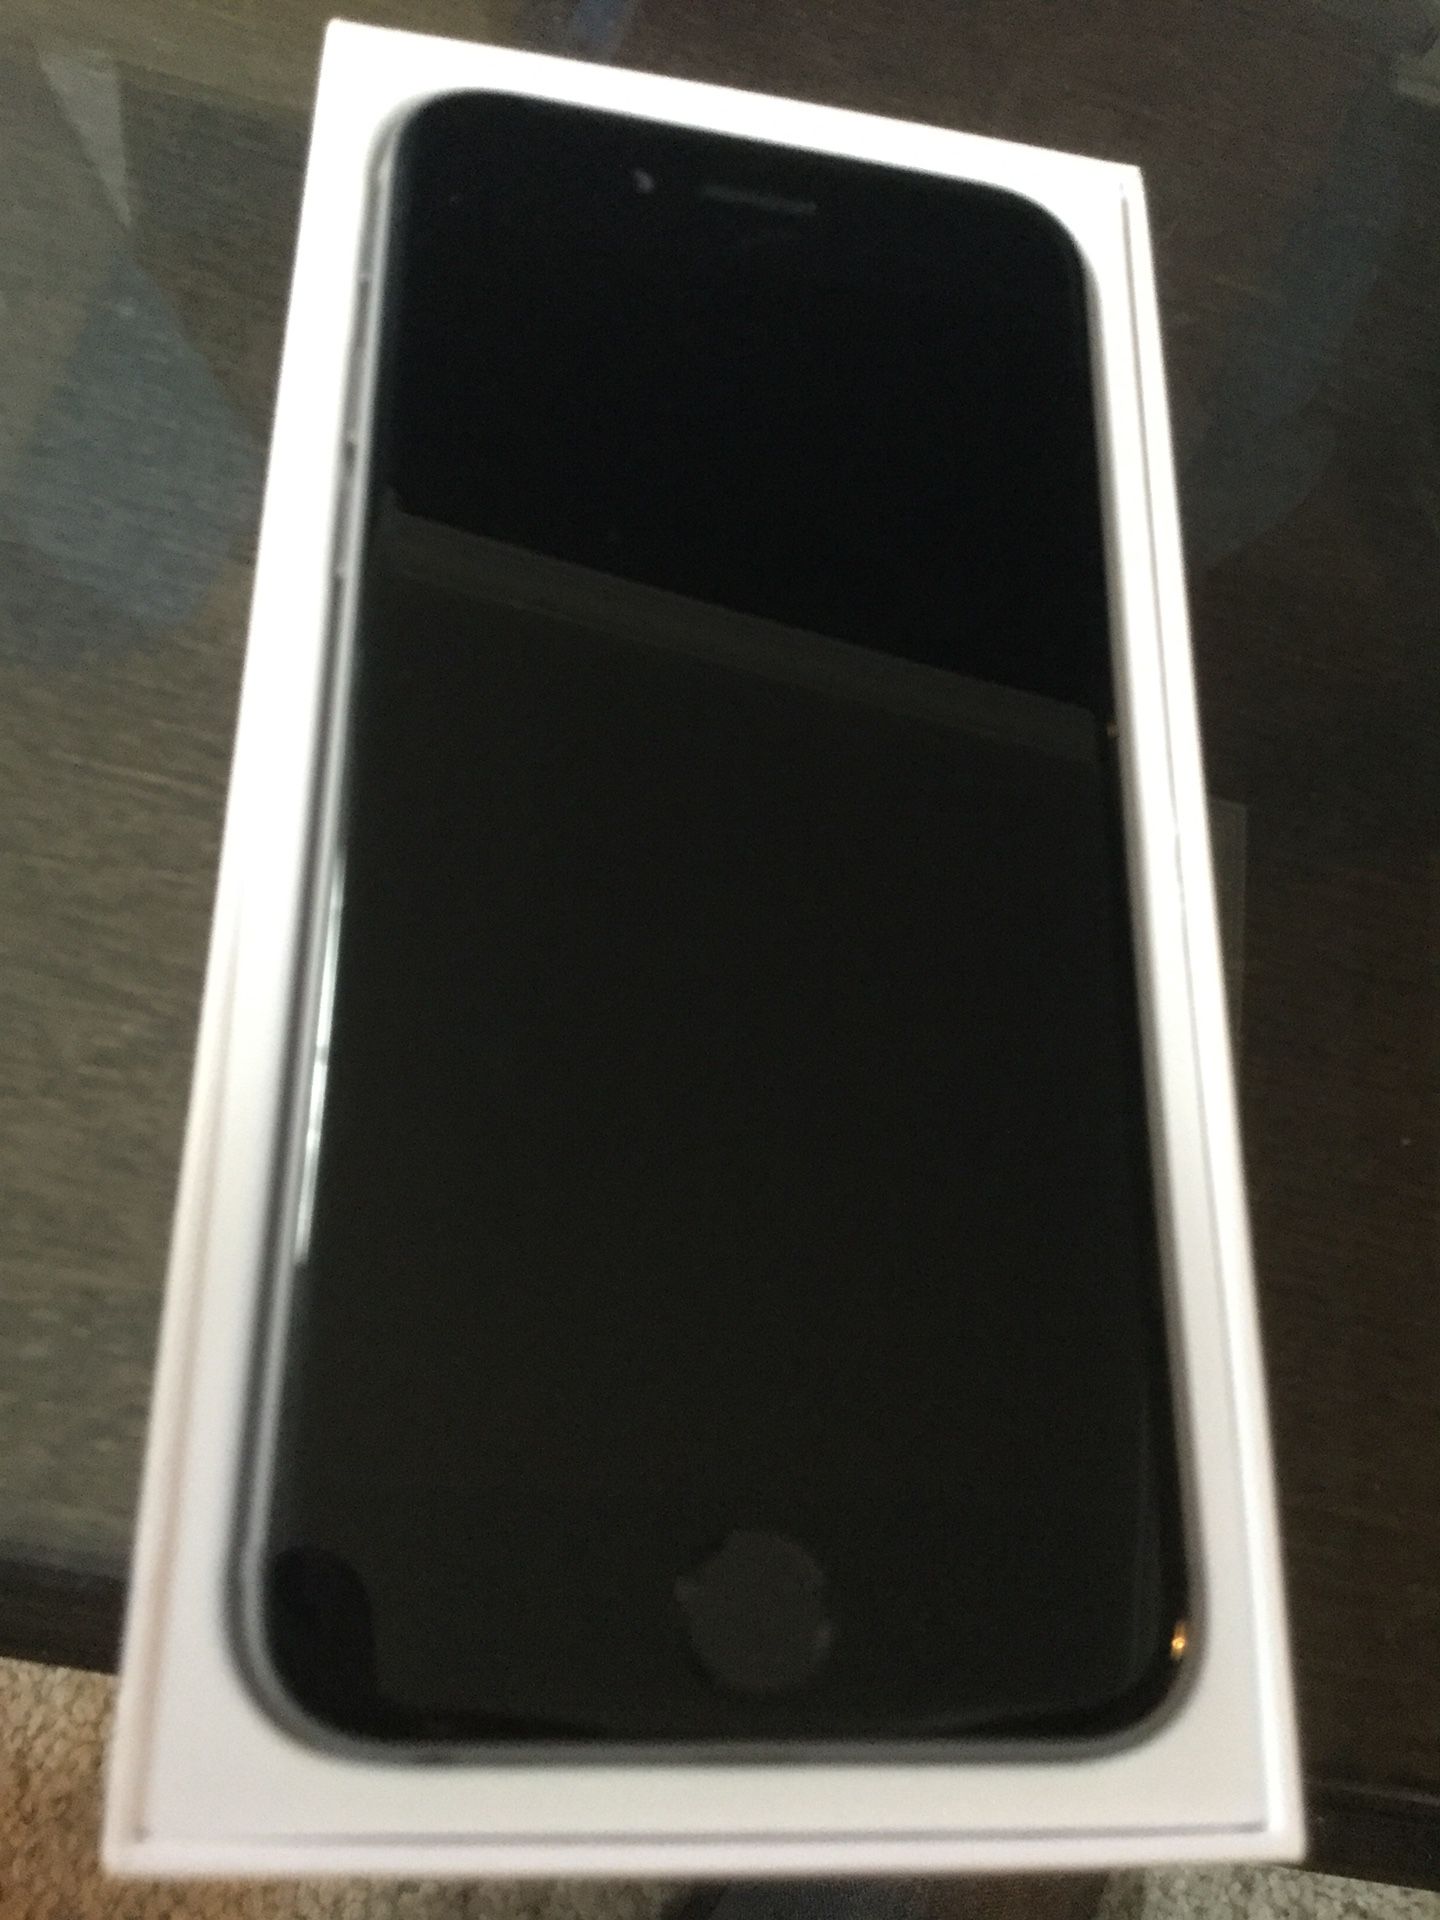 IPhone 6, 64Gb, Factory Unlocked, Strong Battery, Boxed w All Accessories!